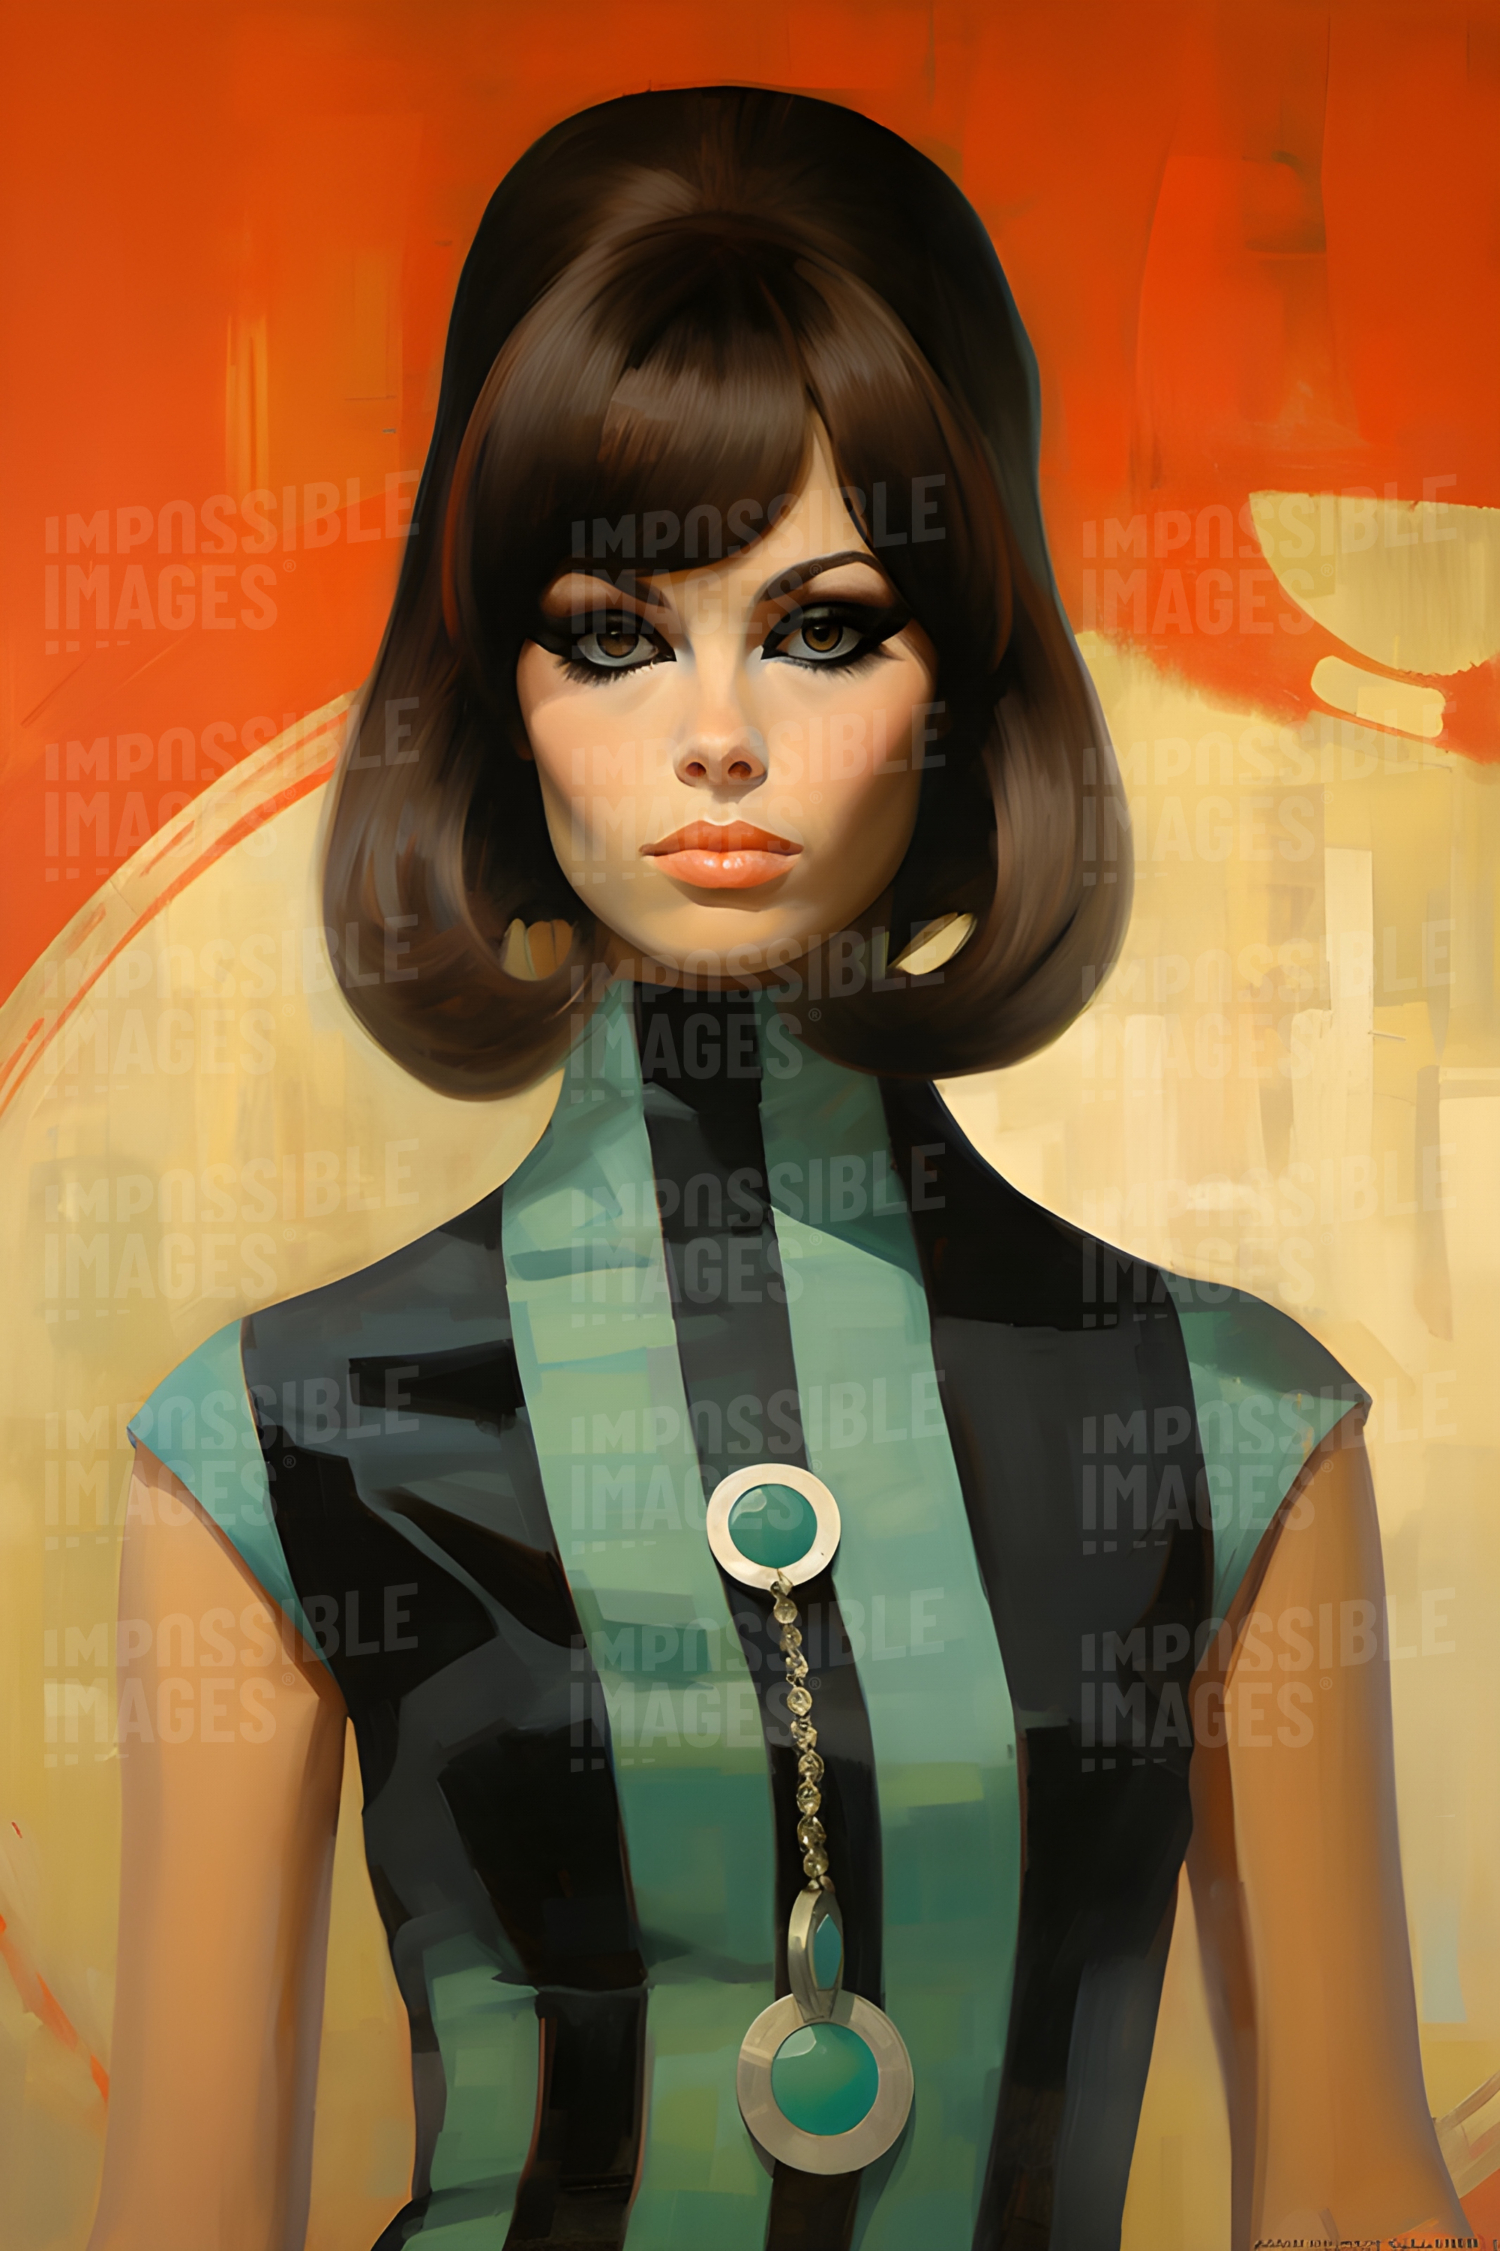 Painting of a 1960s fashion model - 